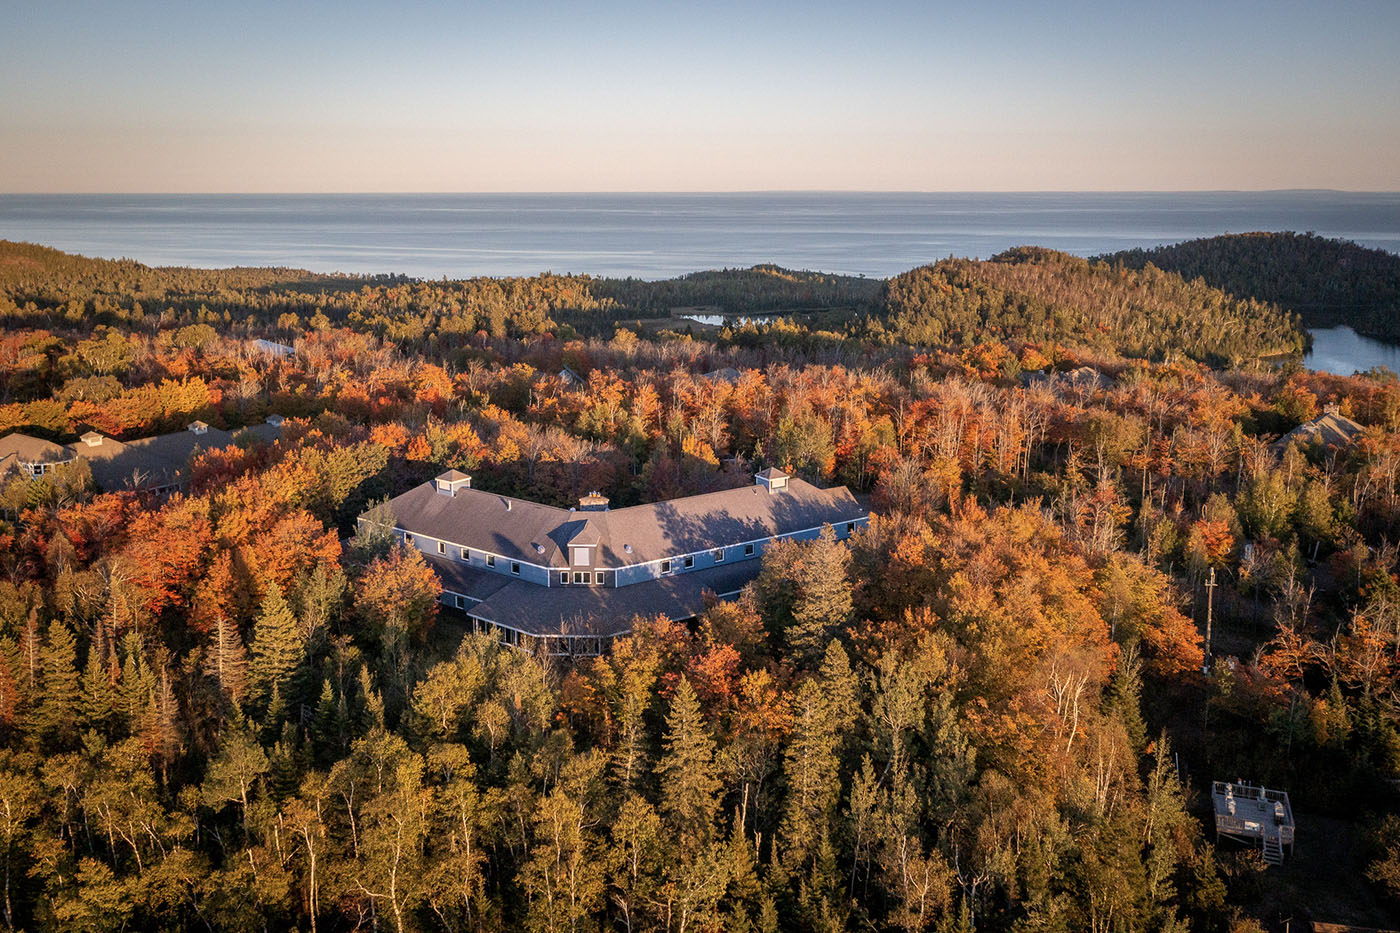 An aerial view of the MAC Lodge at Wolf Ridge Environmental Learning Center. A building is surrounded by green, yellow, and orange trees in an evening sunlight. A lake's edge is in the background.